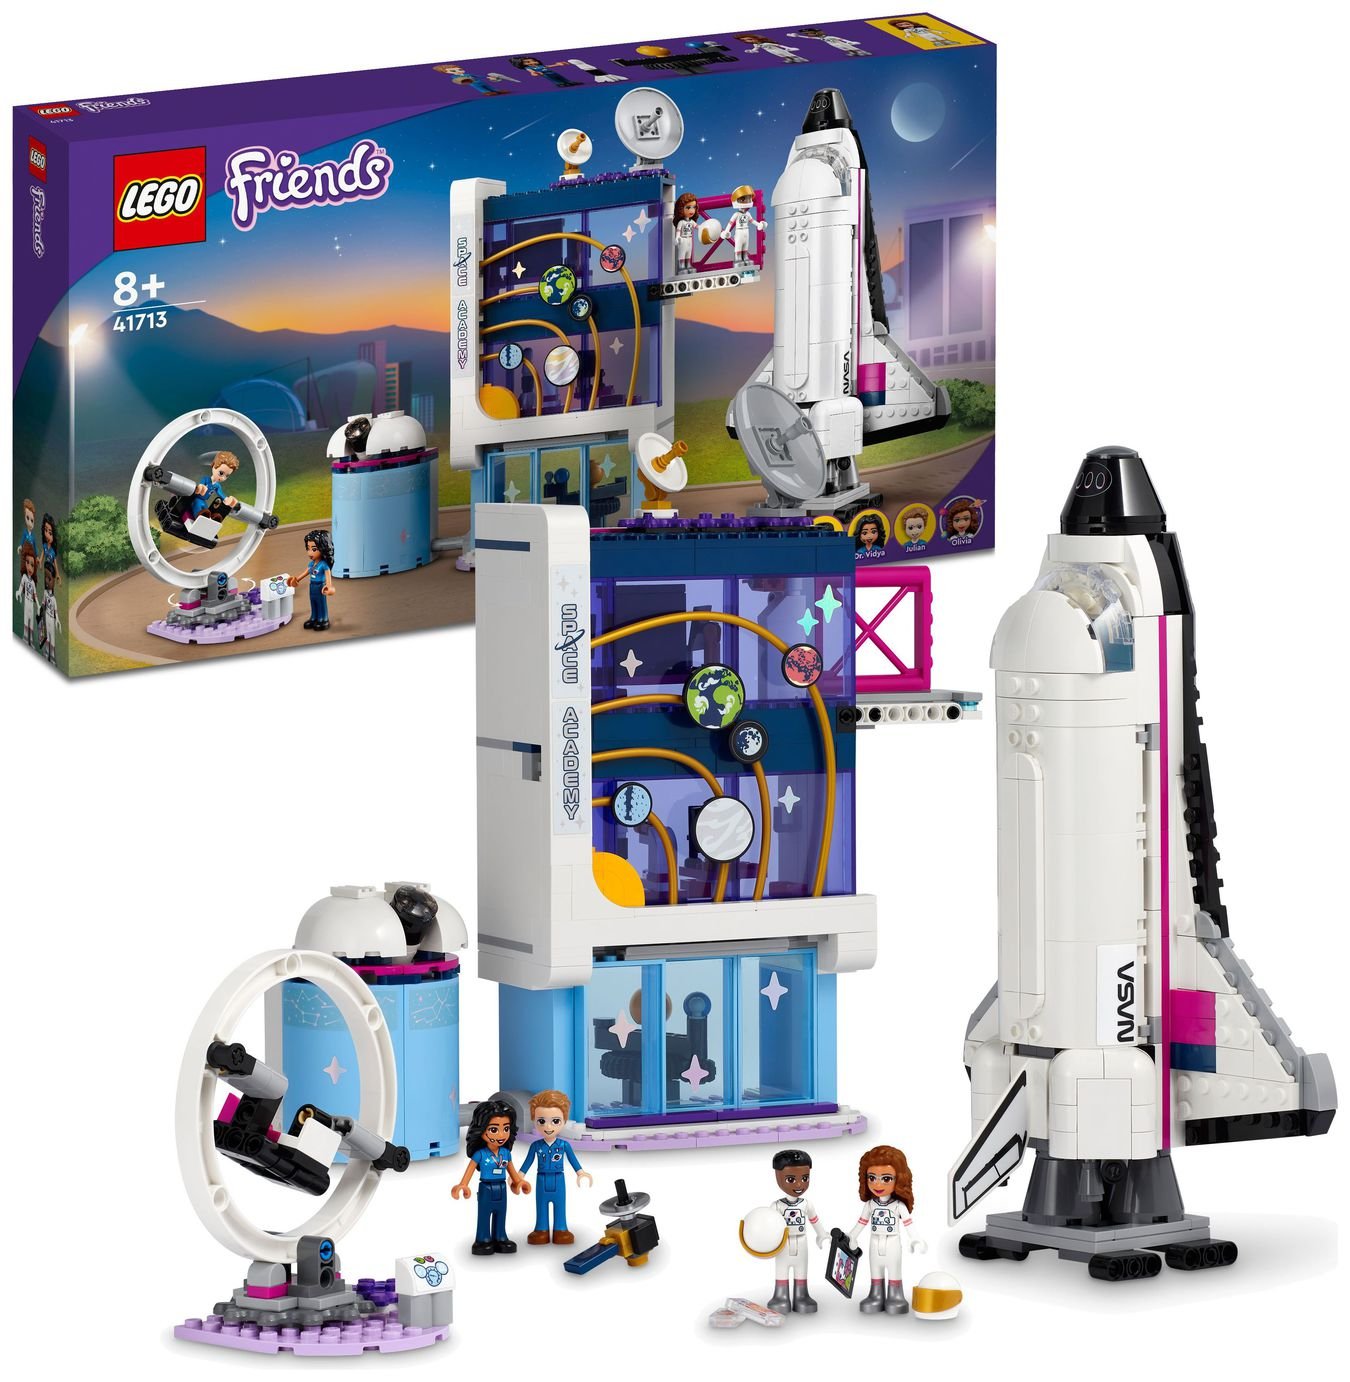 LEGO Friends Olivia's Space Academy with Toy Rocket 41713